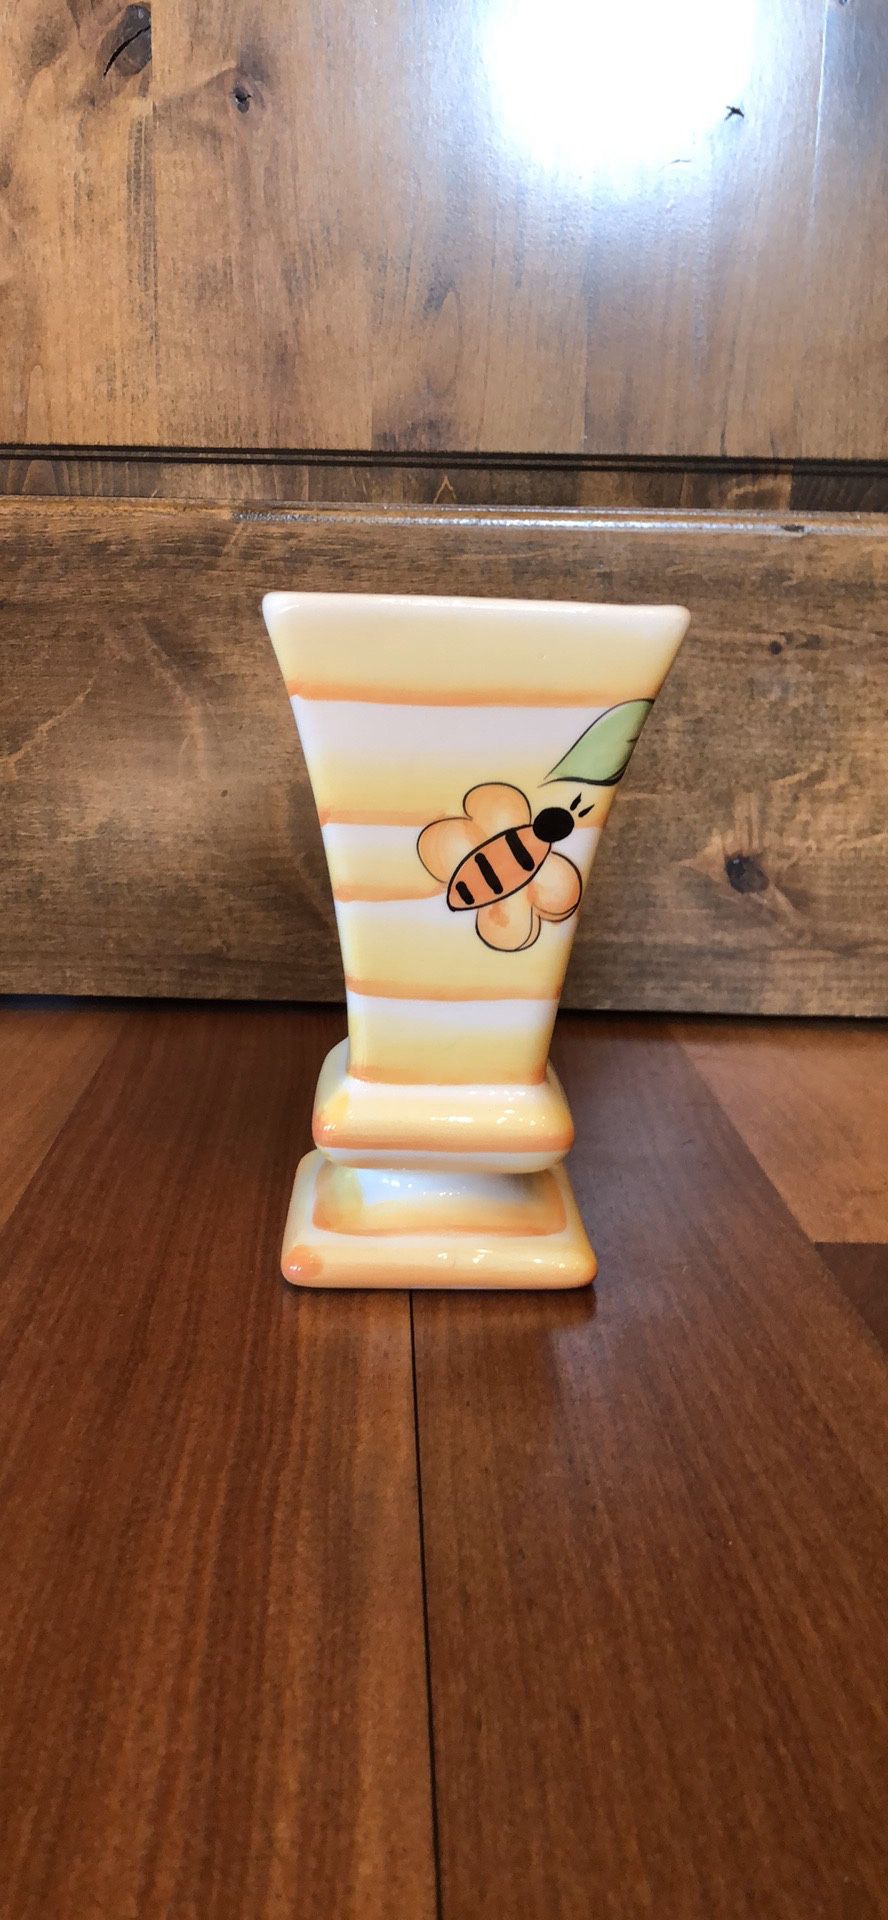 Bumble Bee and Flower Vase